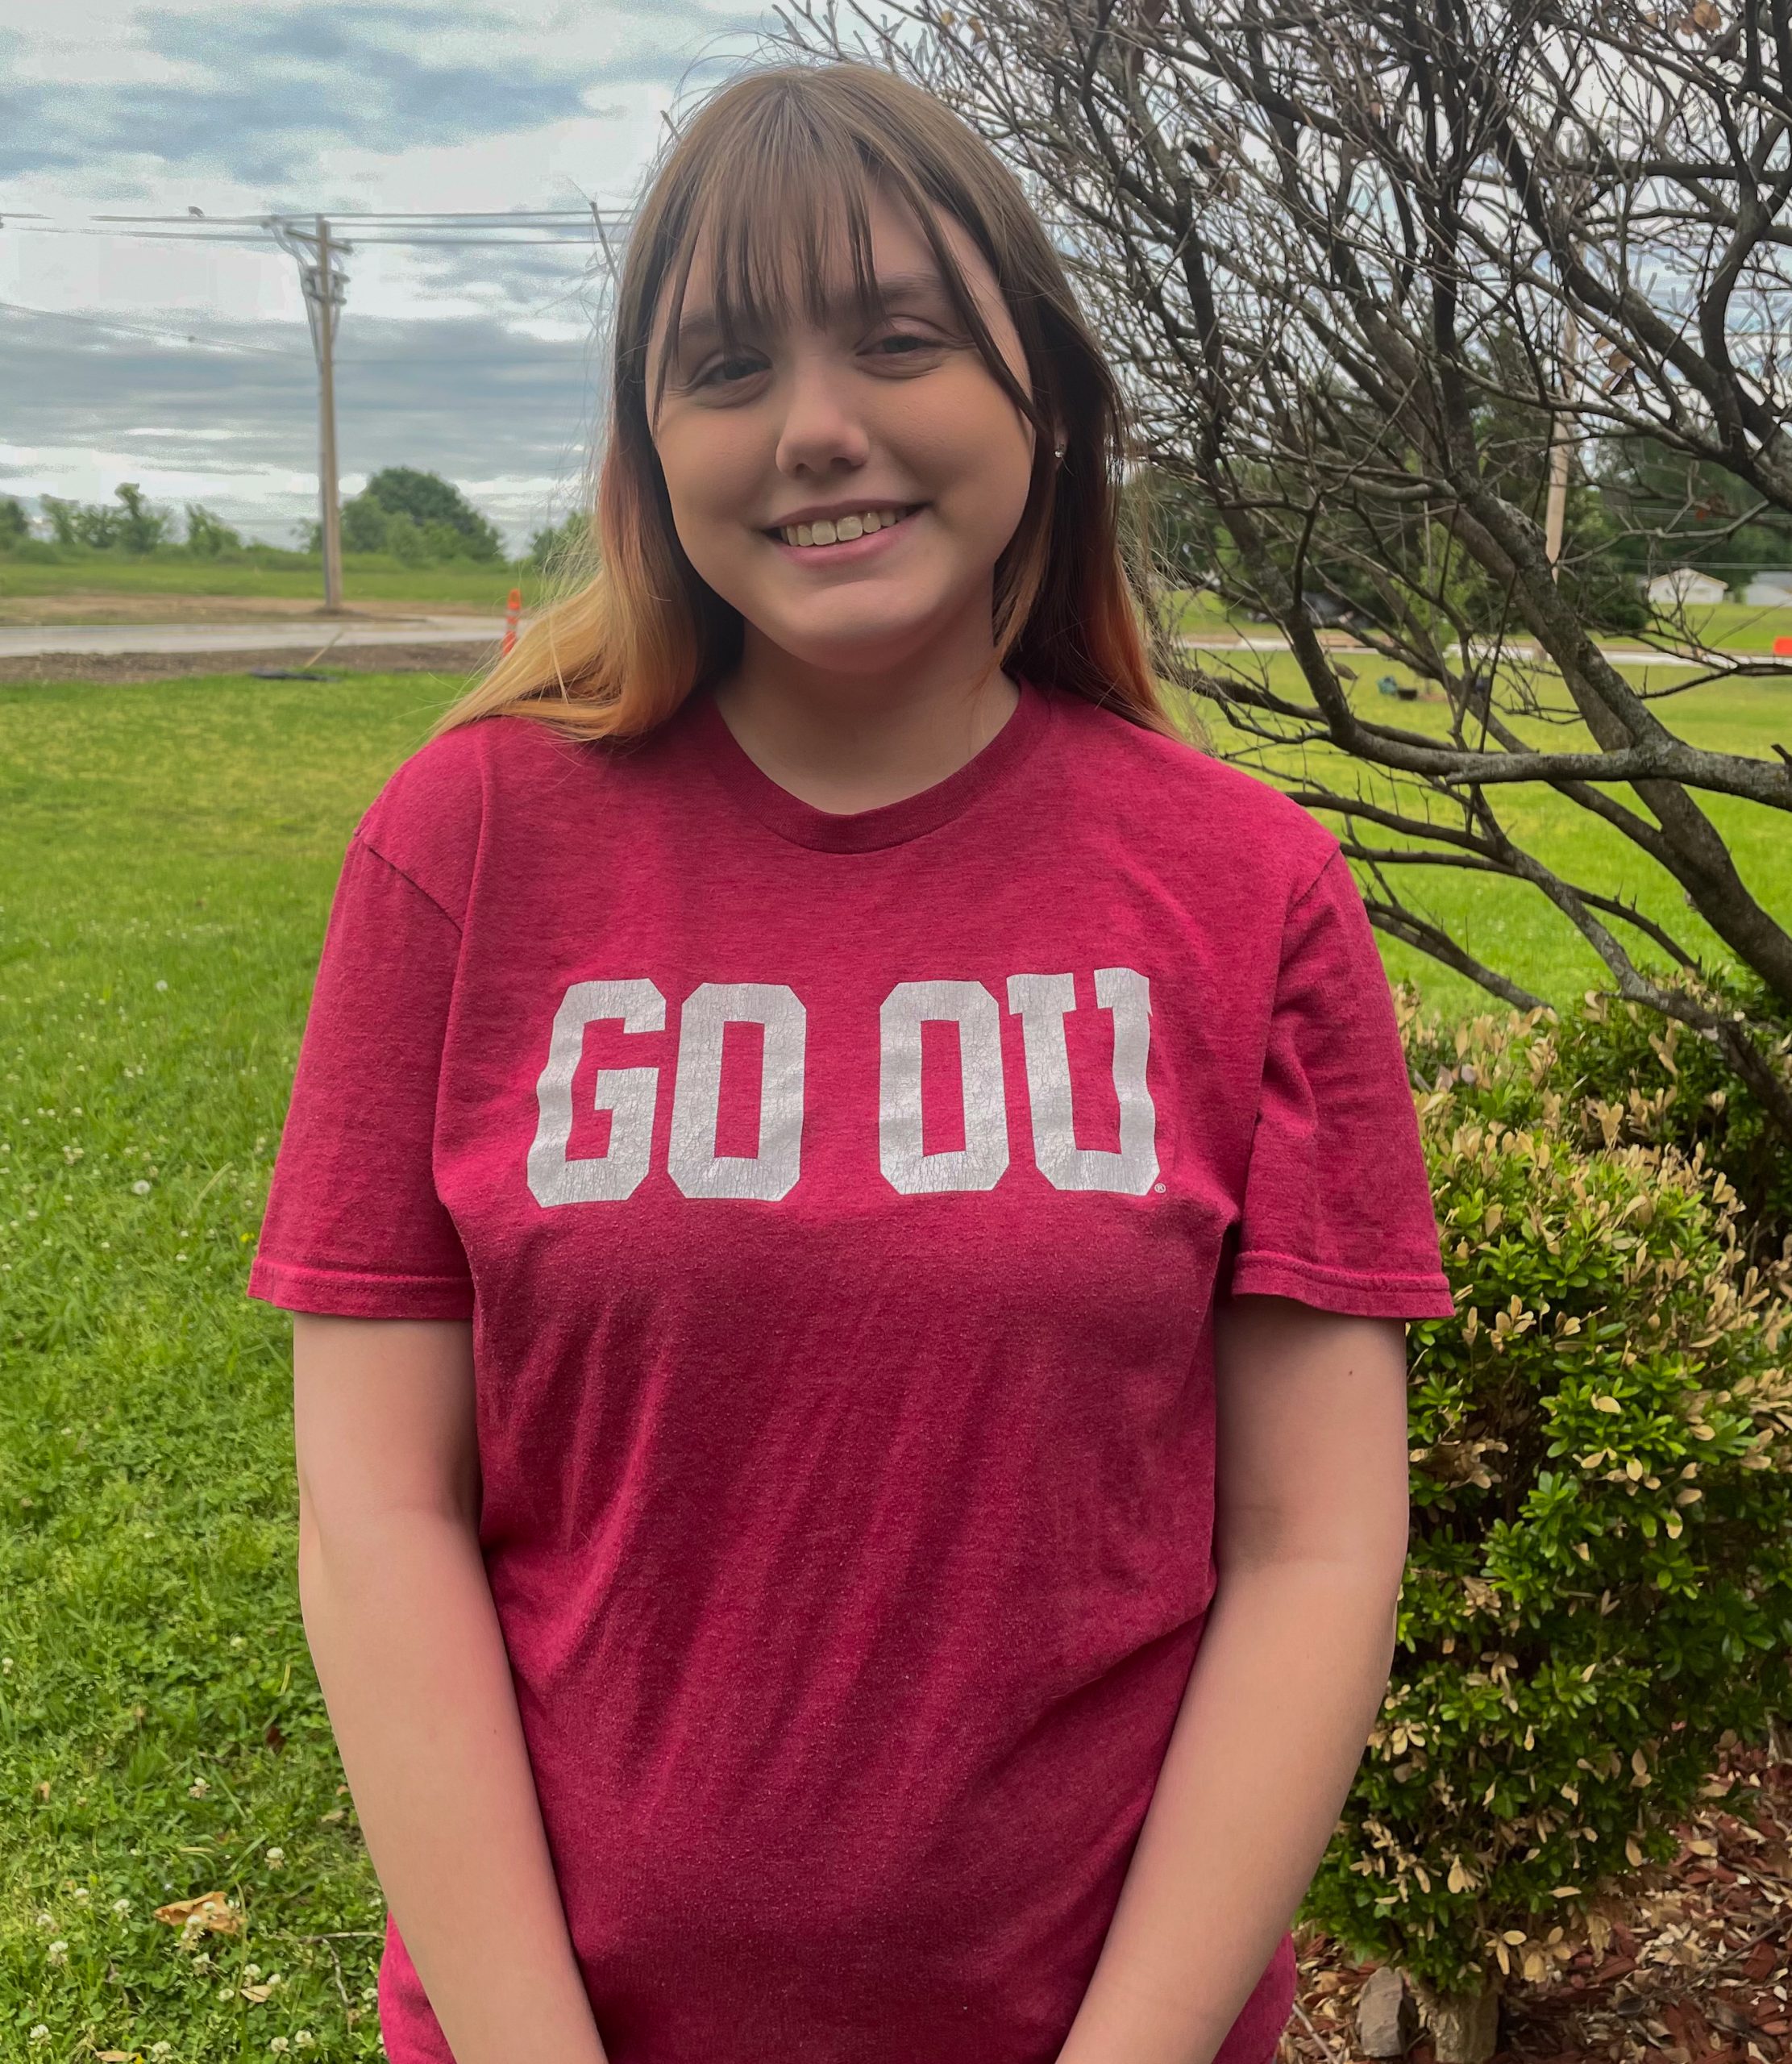 Mykayla Bowser wore the shirt she received when she applied for OU.